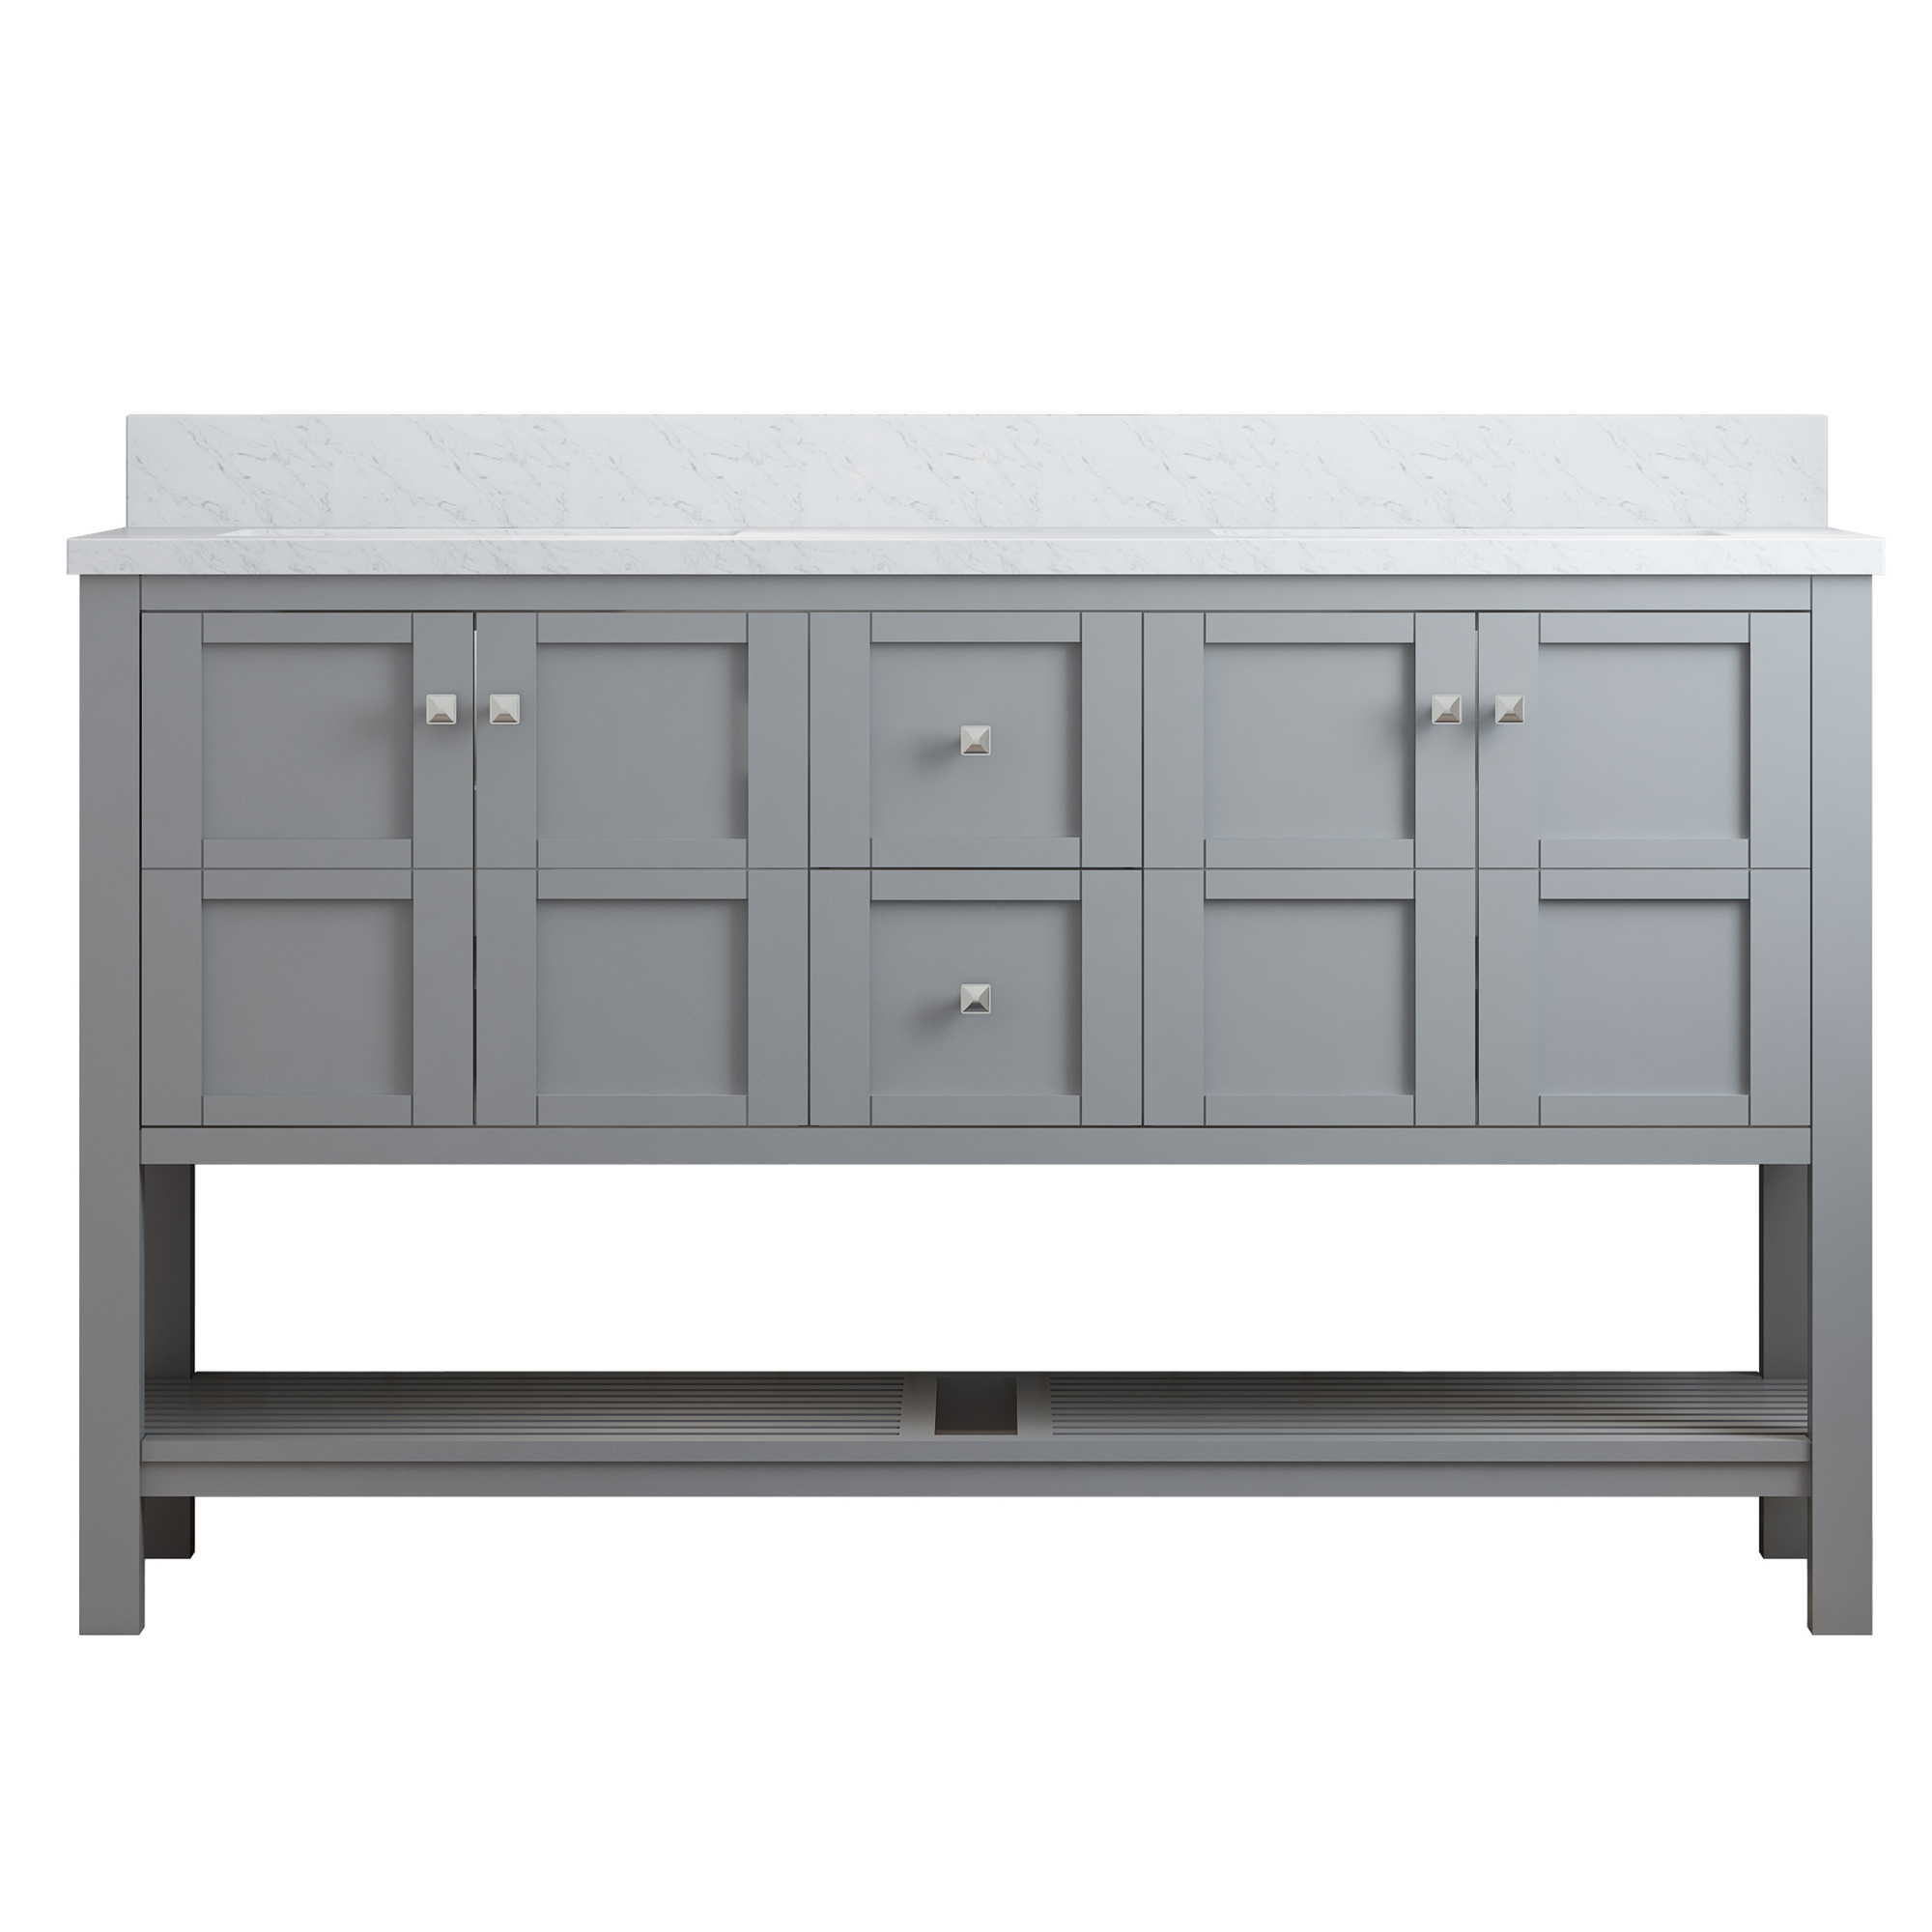 CASAINC Bathroom Vanity 60 x 22 x 35.4 with 1.2" Thickness Countertop & Backsplash, Bothe Side Rectangular Sink, 4 Soft Closing Doors, 2 Dove Tail Drawer Construction, Soft Close Drawer Hinges, Gray, White (With Mirror)